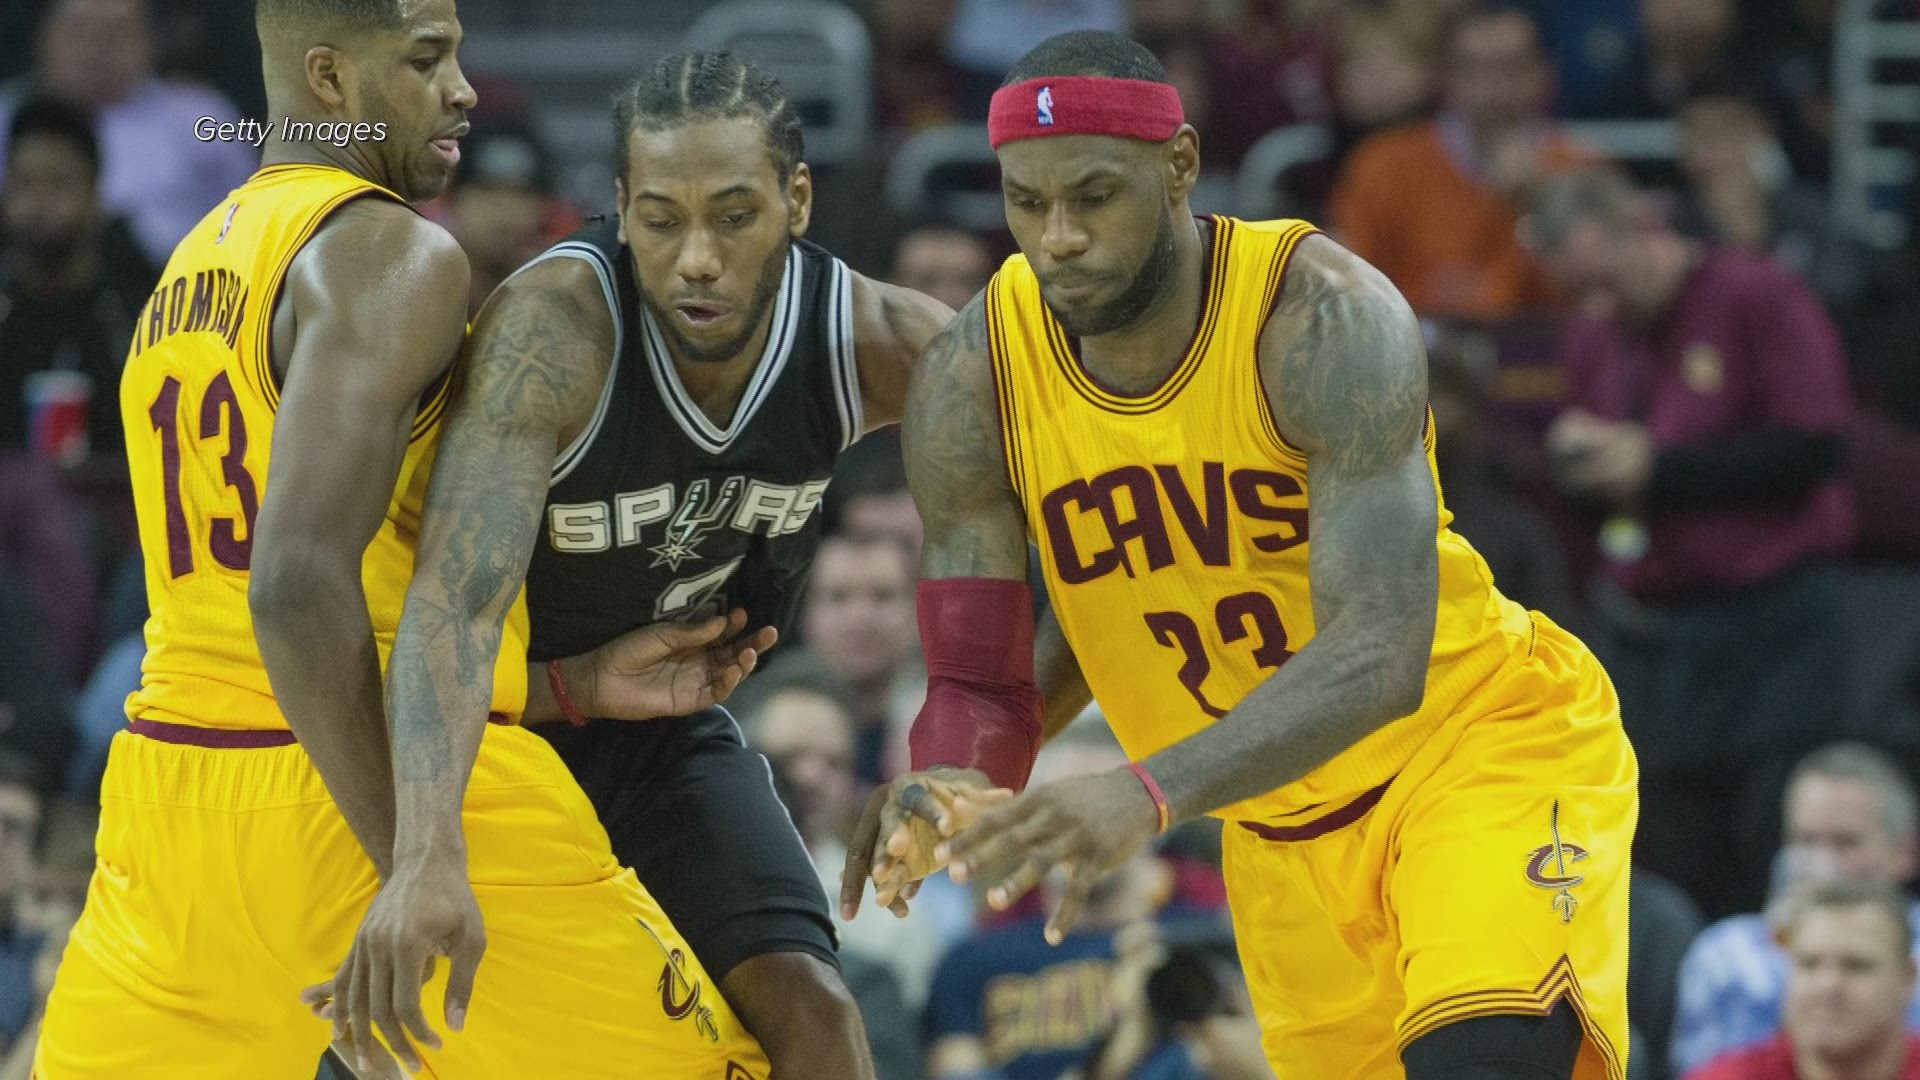 Leonard's trade request could impact Cavs' plans